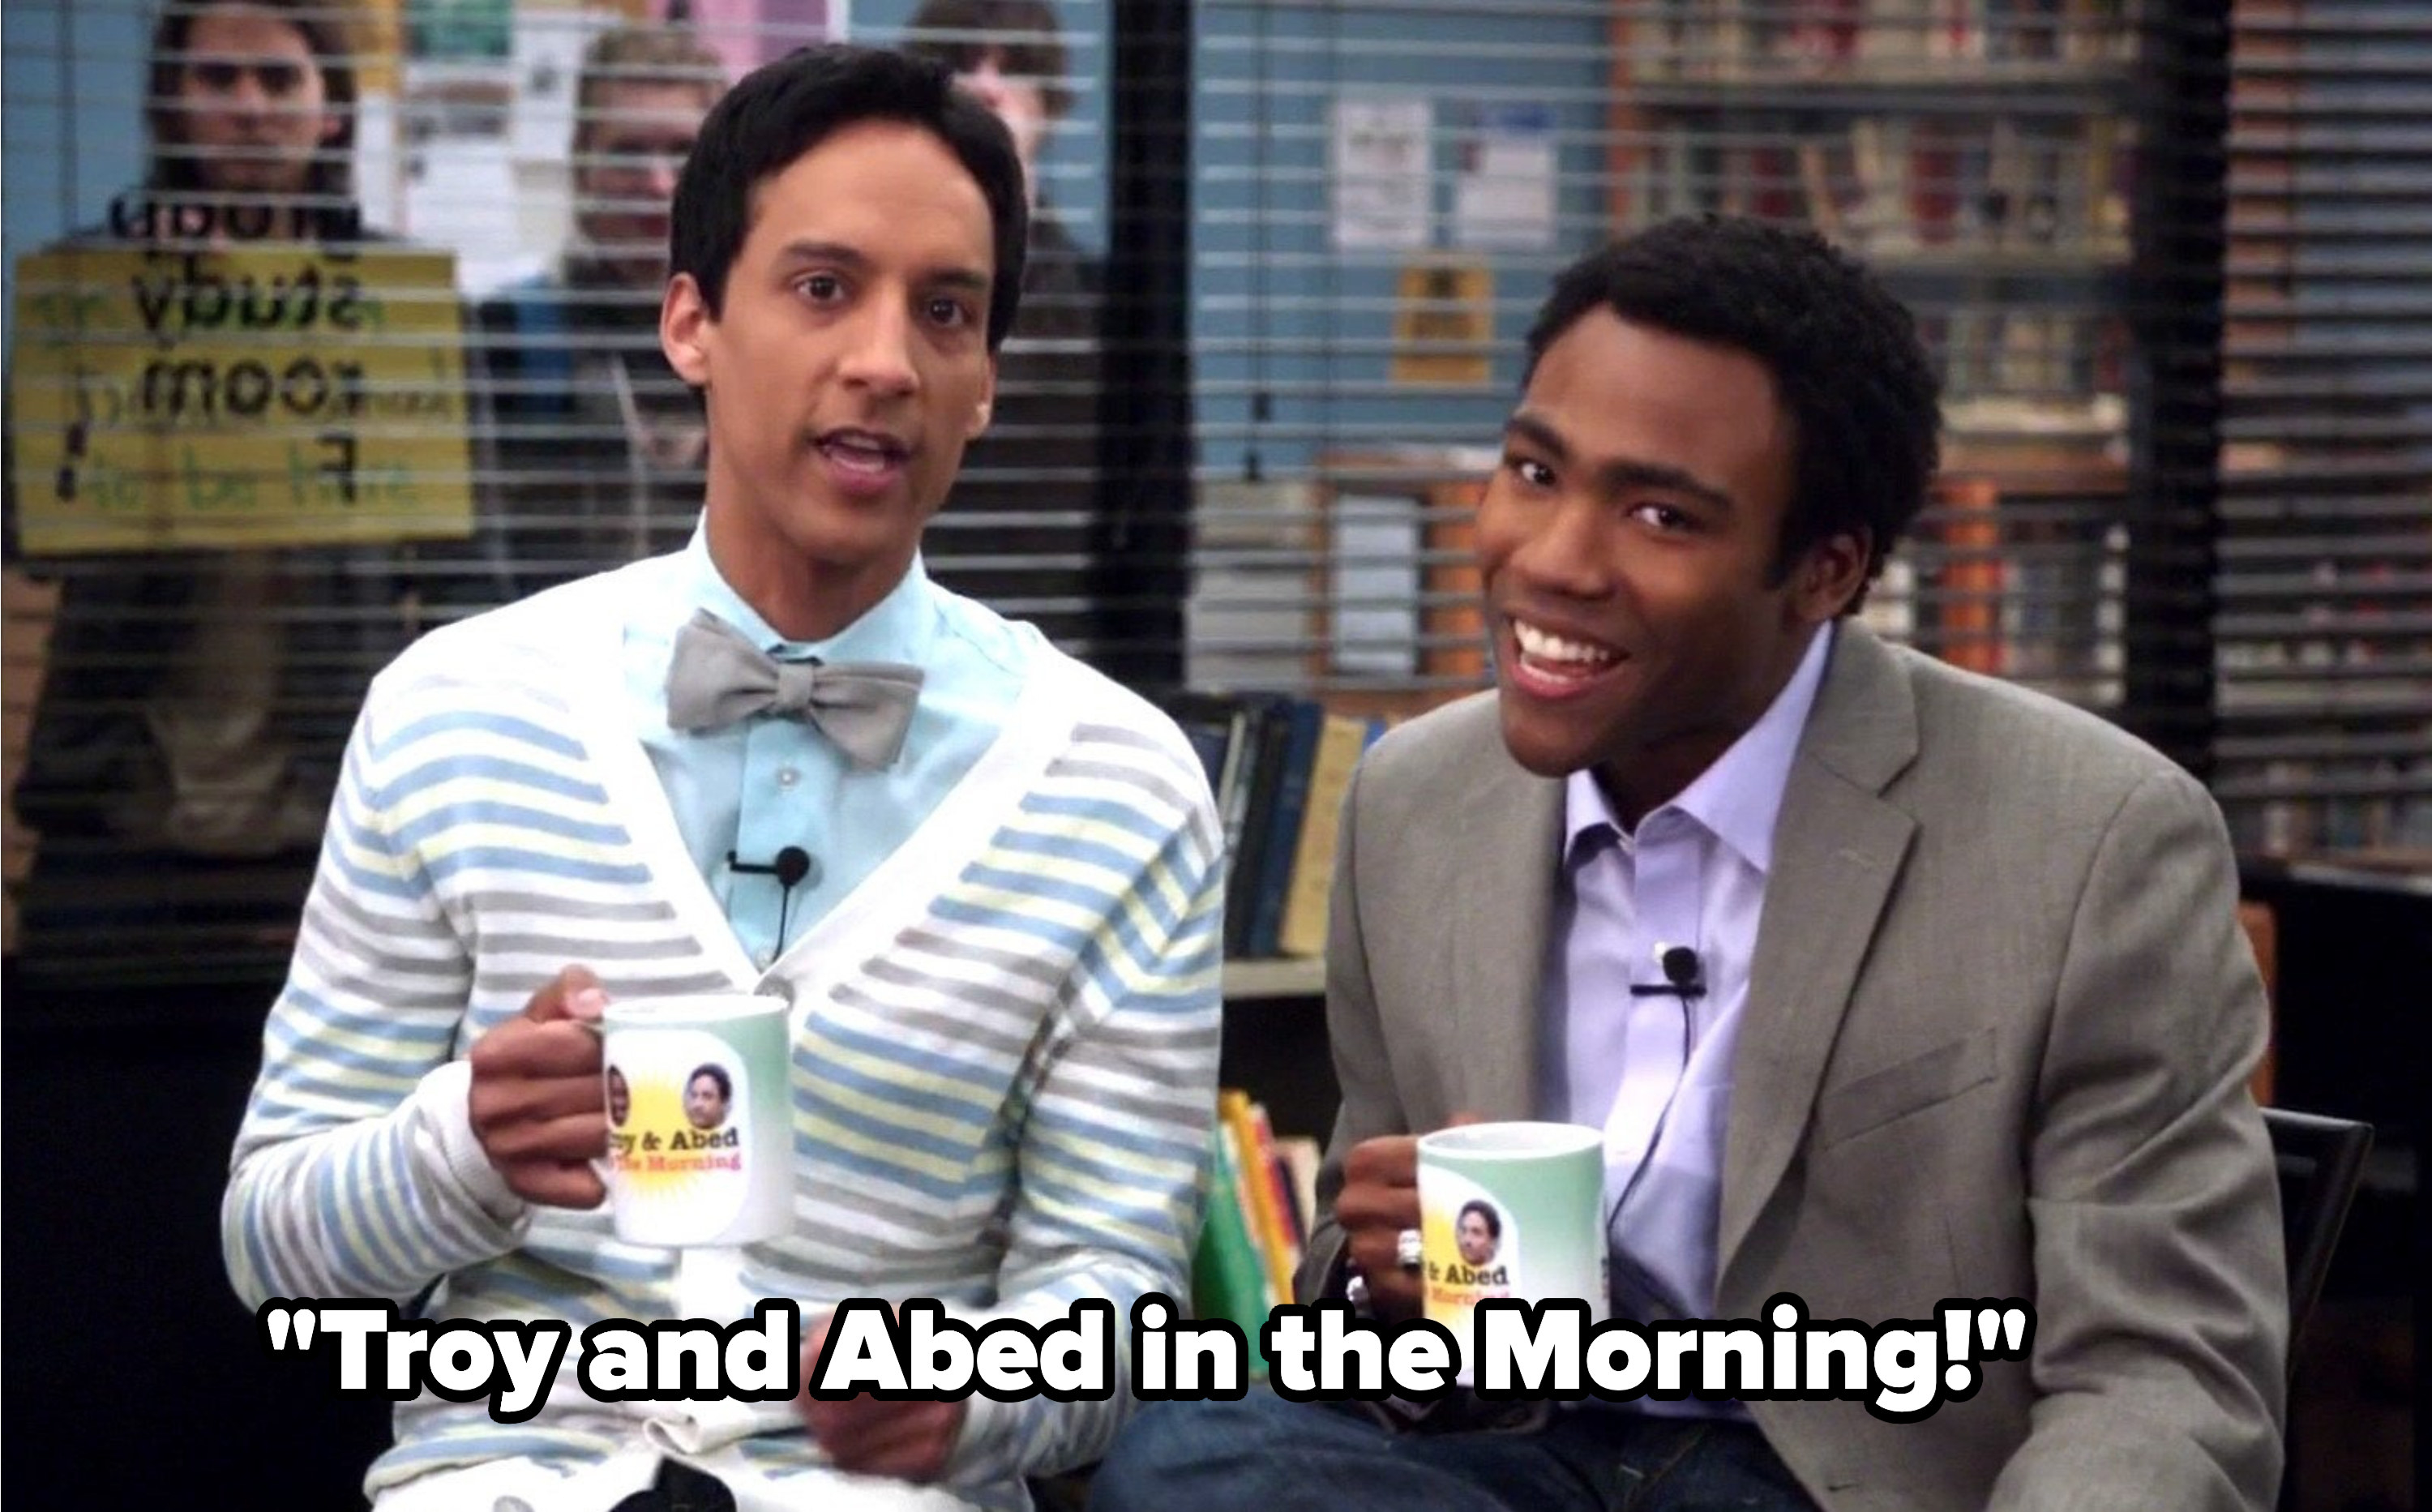 Troy and Abed sitting for their imaginary talk show